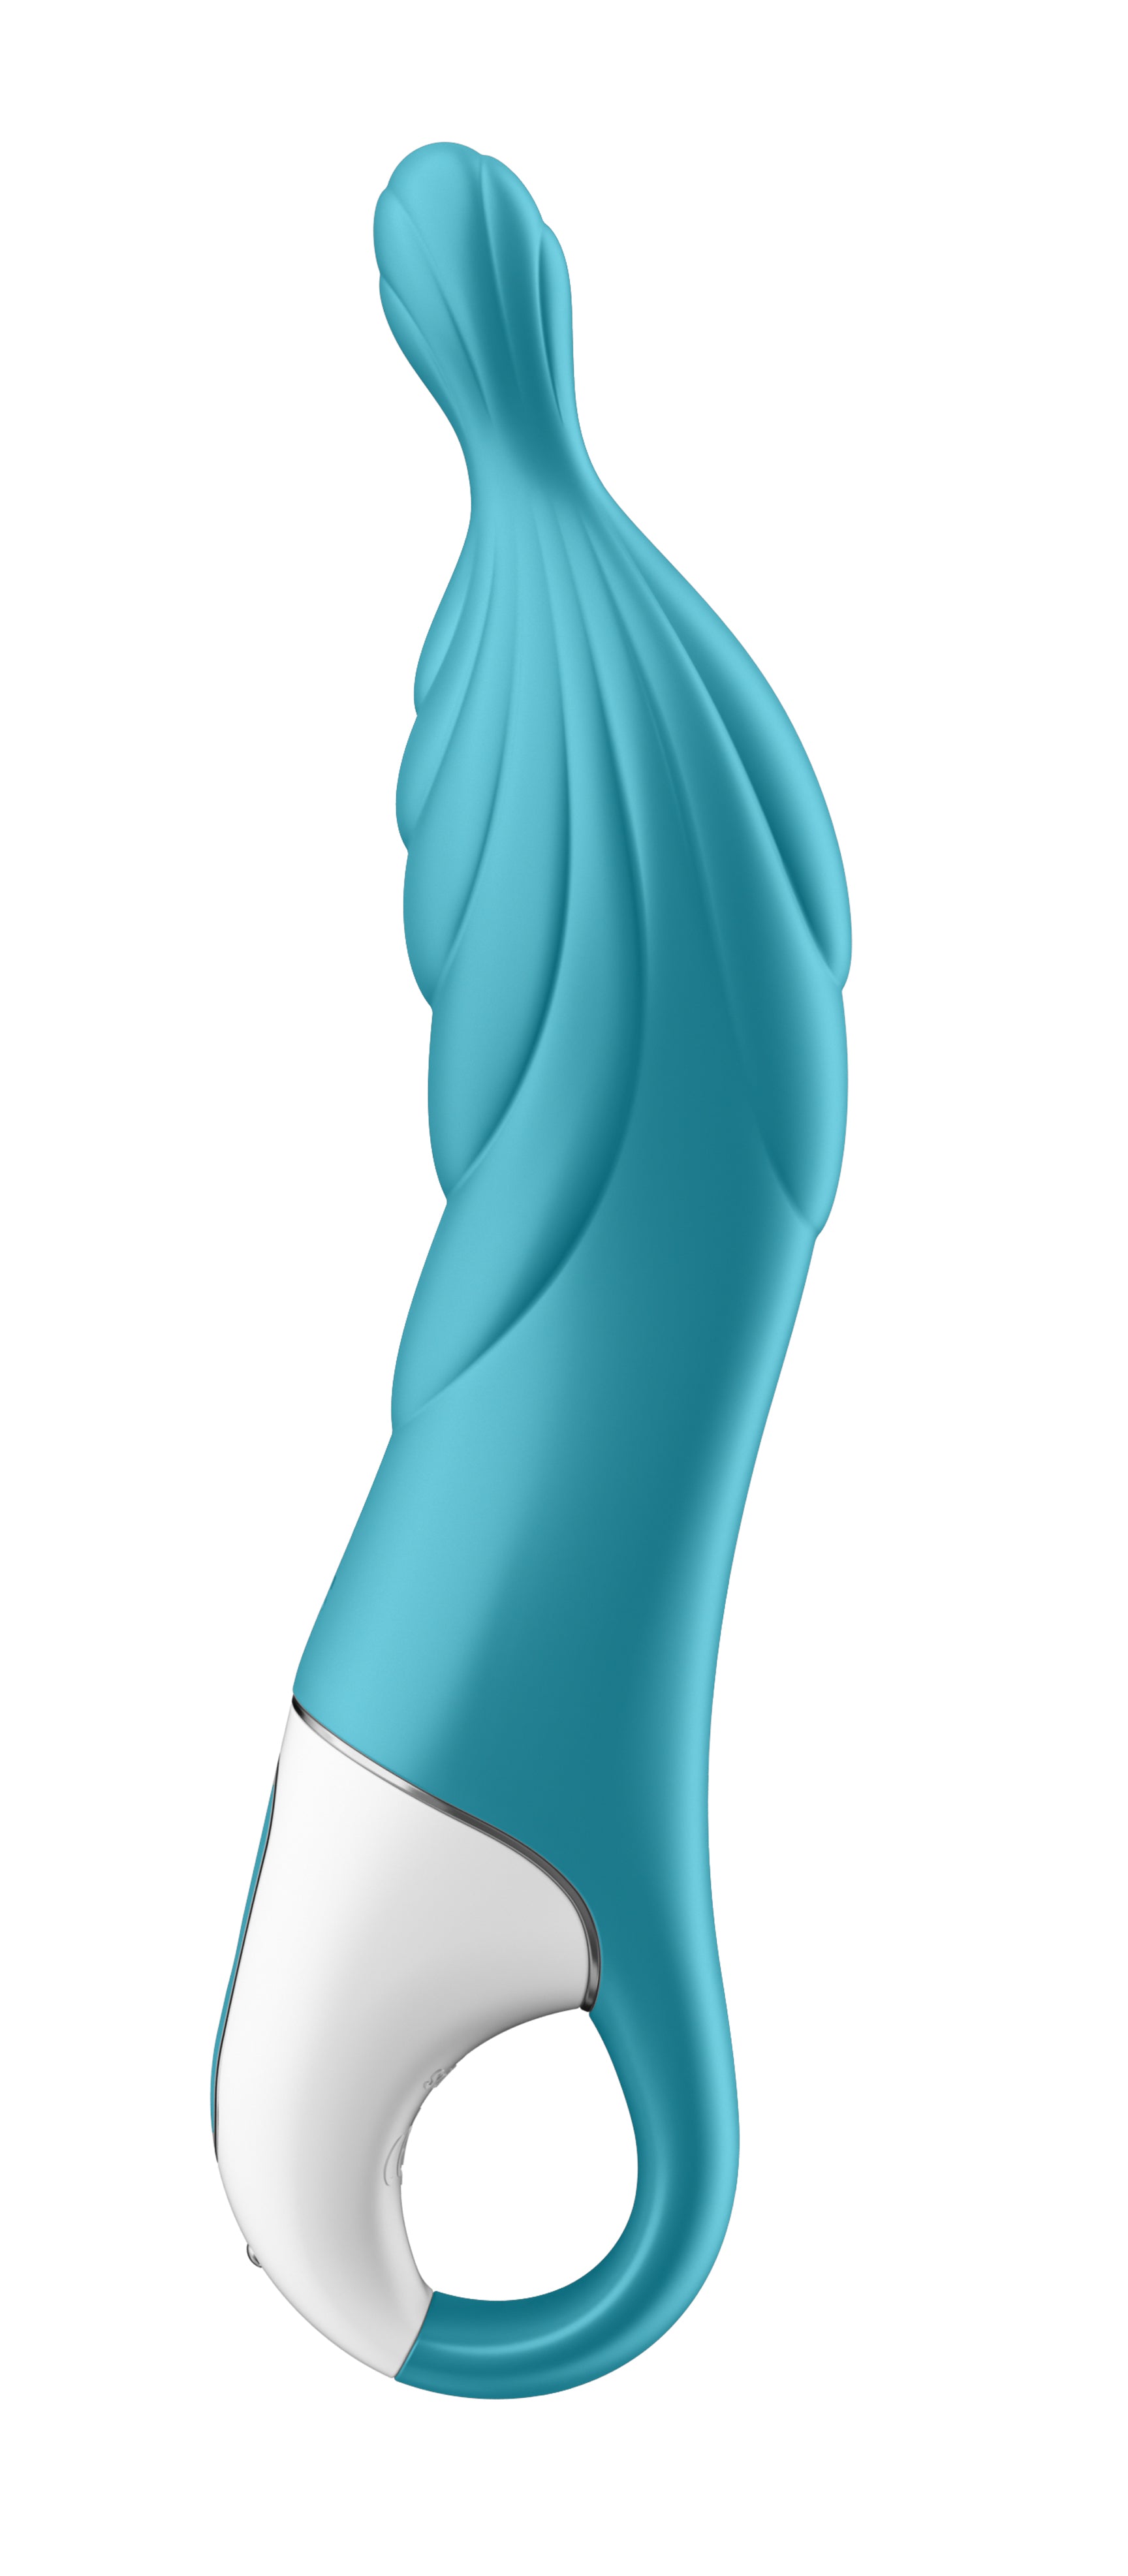 A-Mazing 2 a-Spot Vibrator - Turquoise Turquoise-5